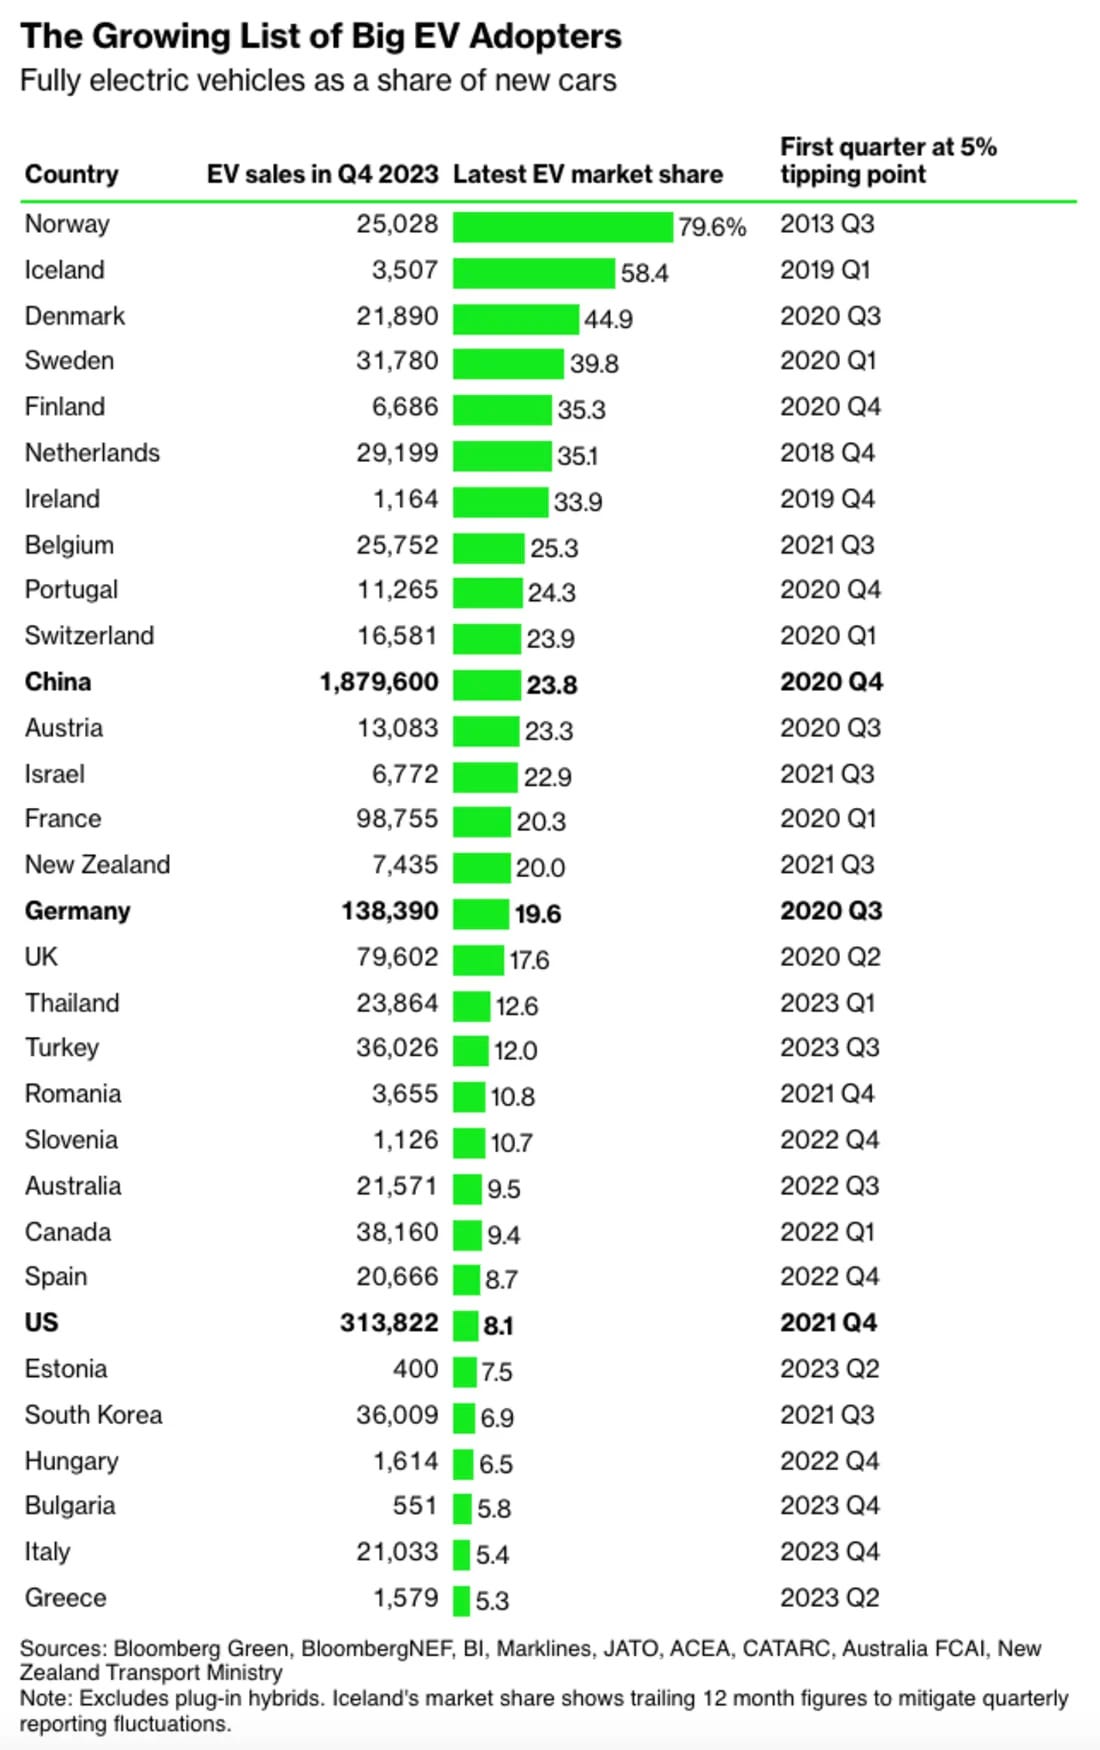 List of EV adoption rates by country